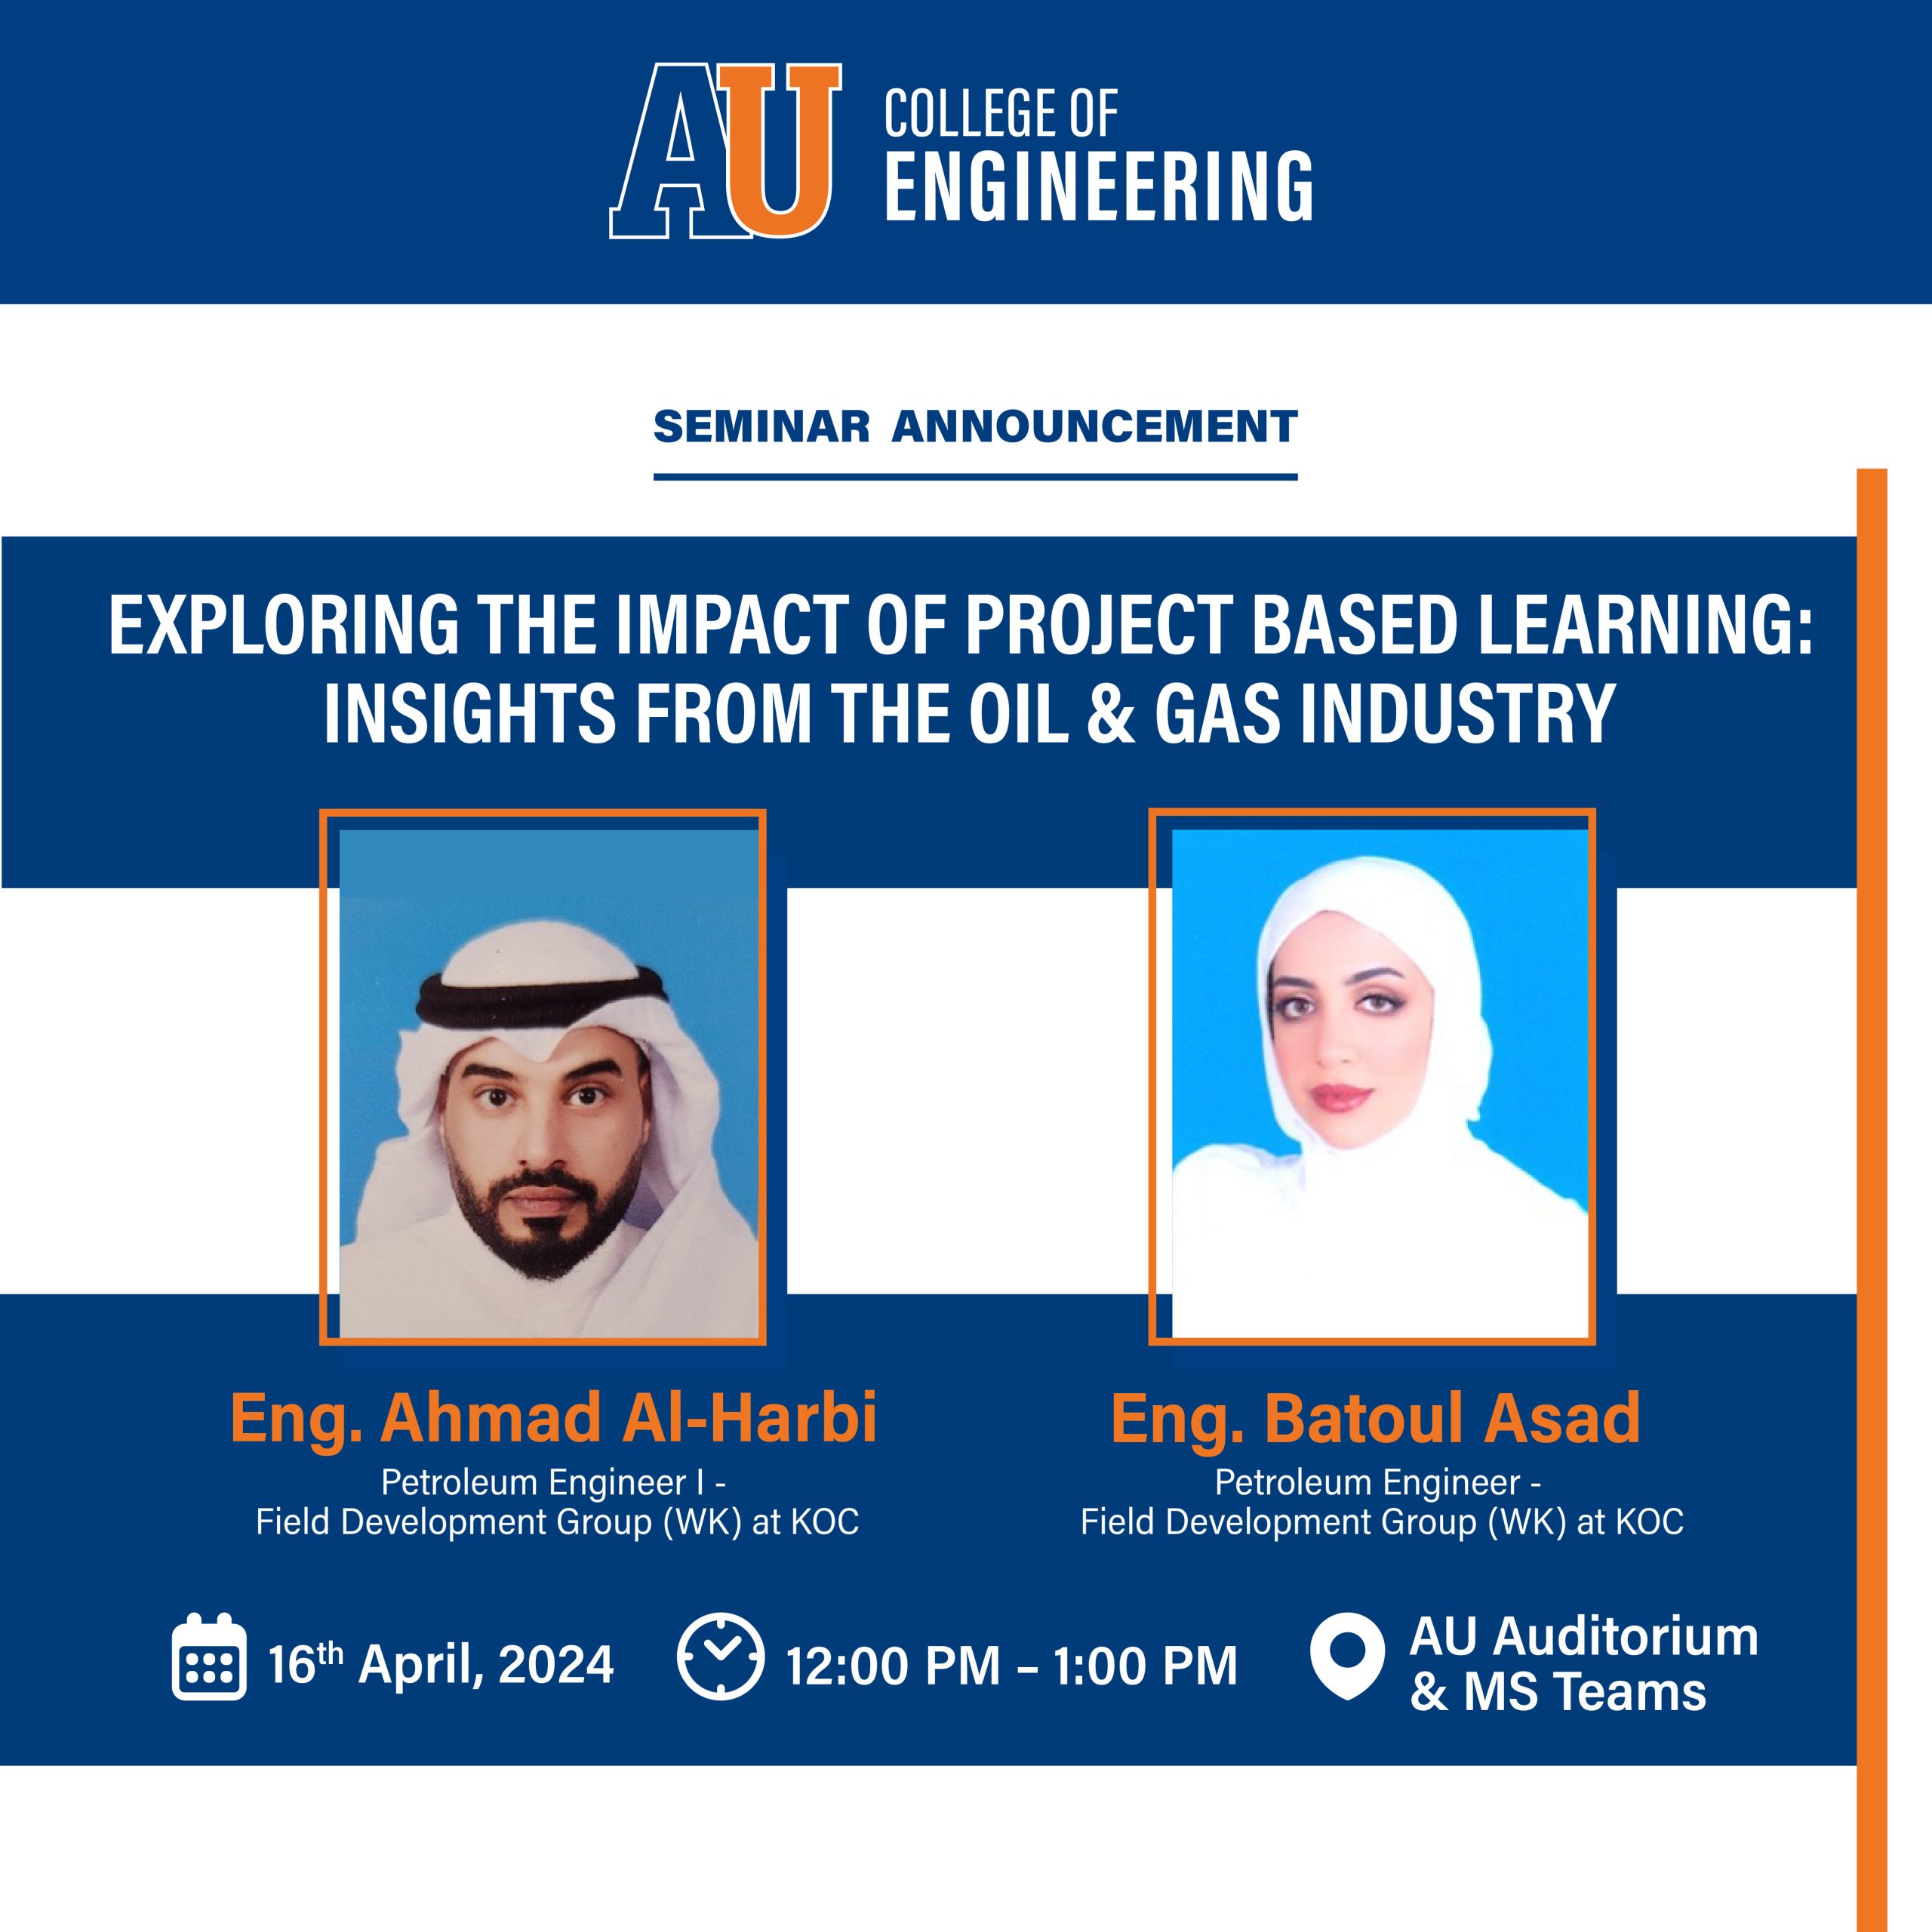 EXPLORING THE IMPACT OF PROJECT BASED LEARNING: INSIGHTS FROM THE OIL & GAS INDUSTRY